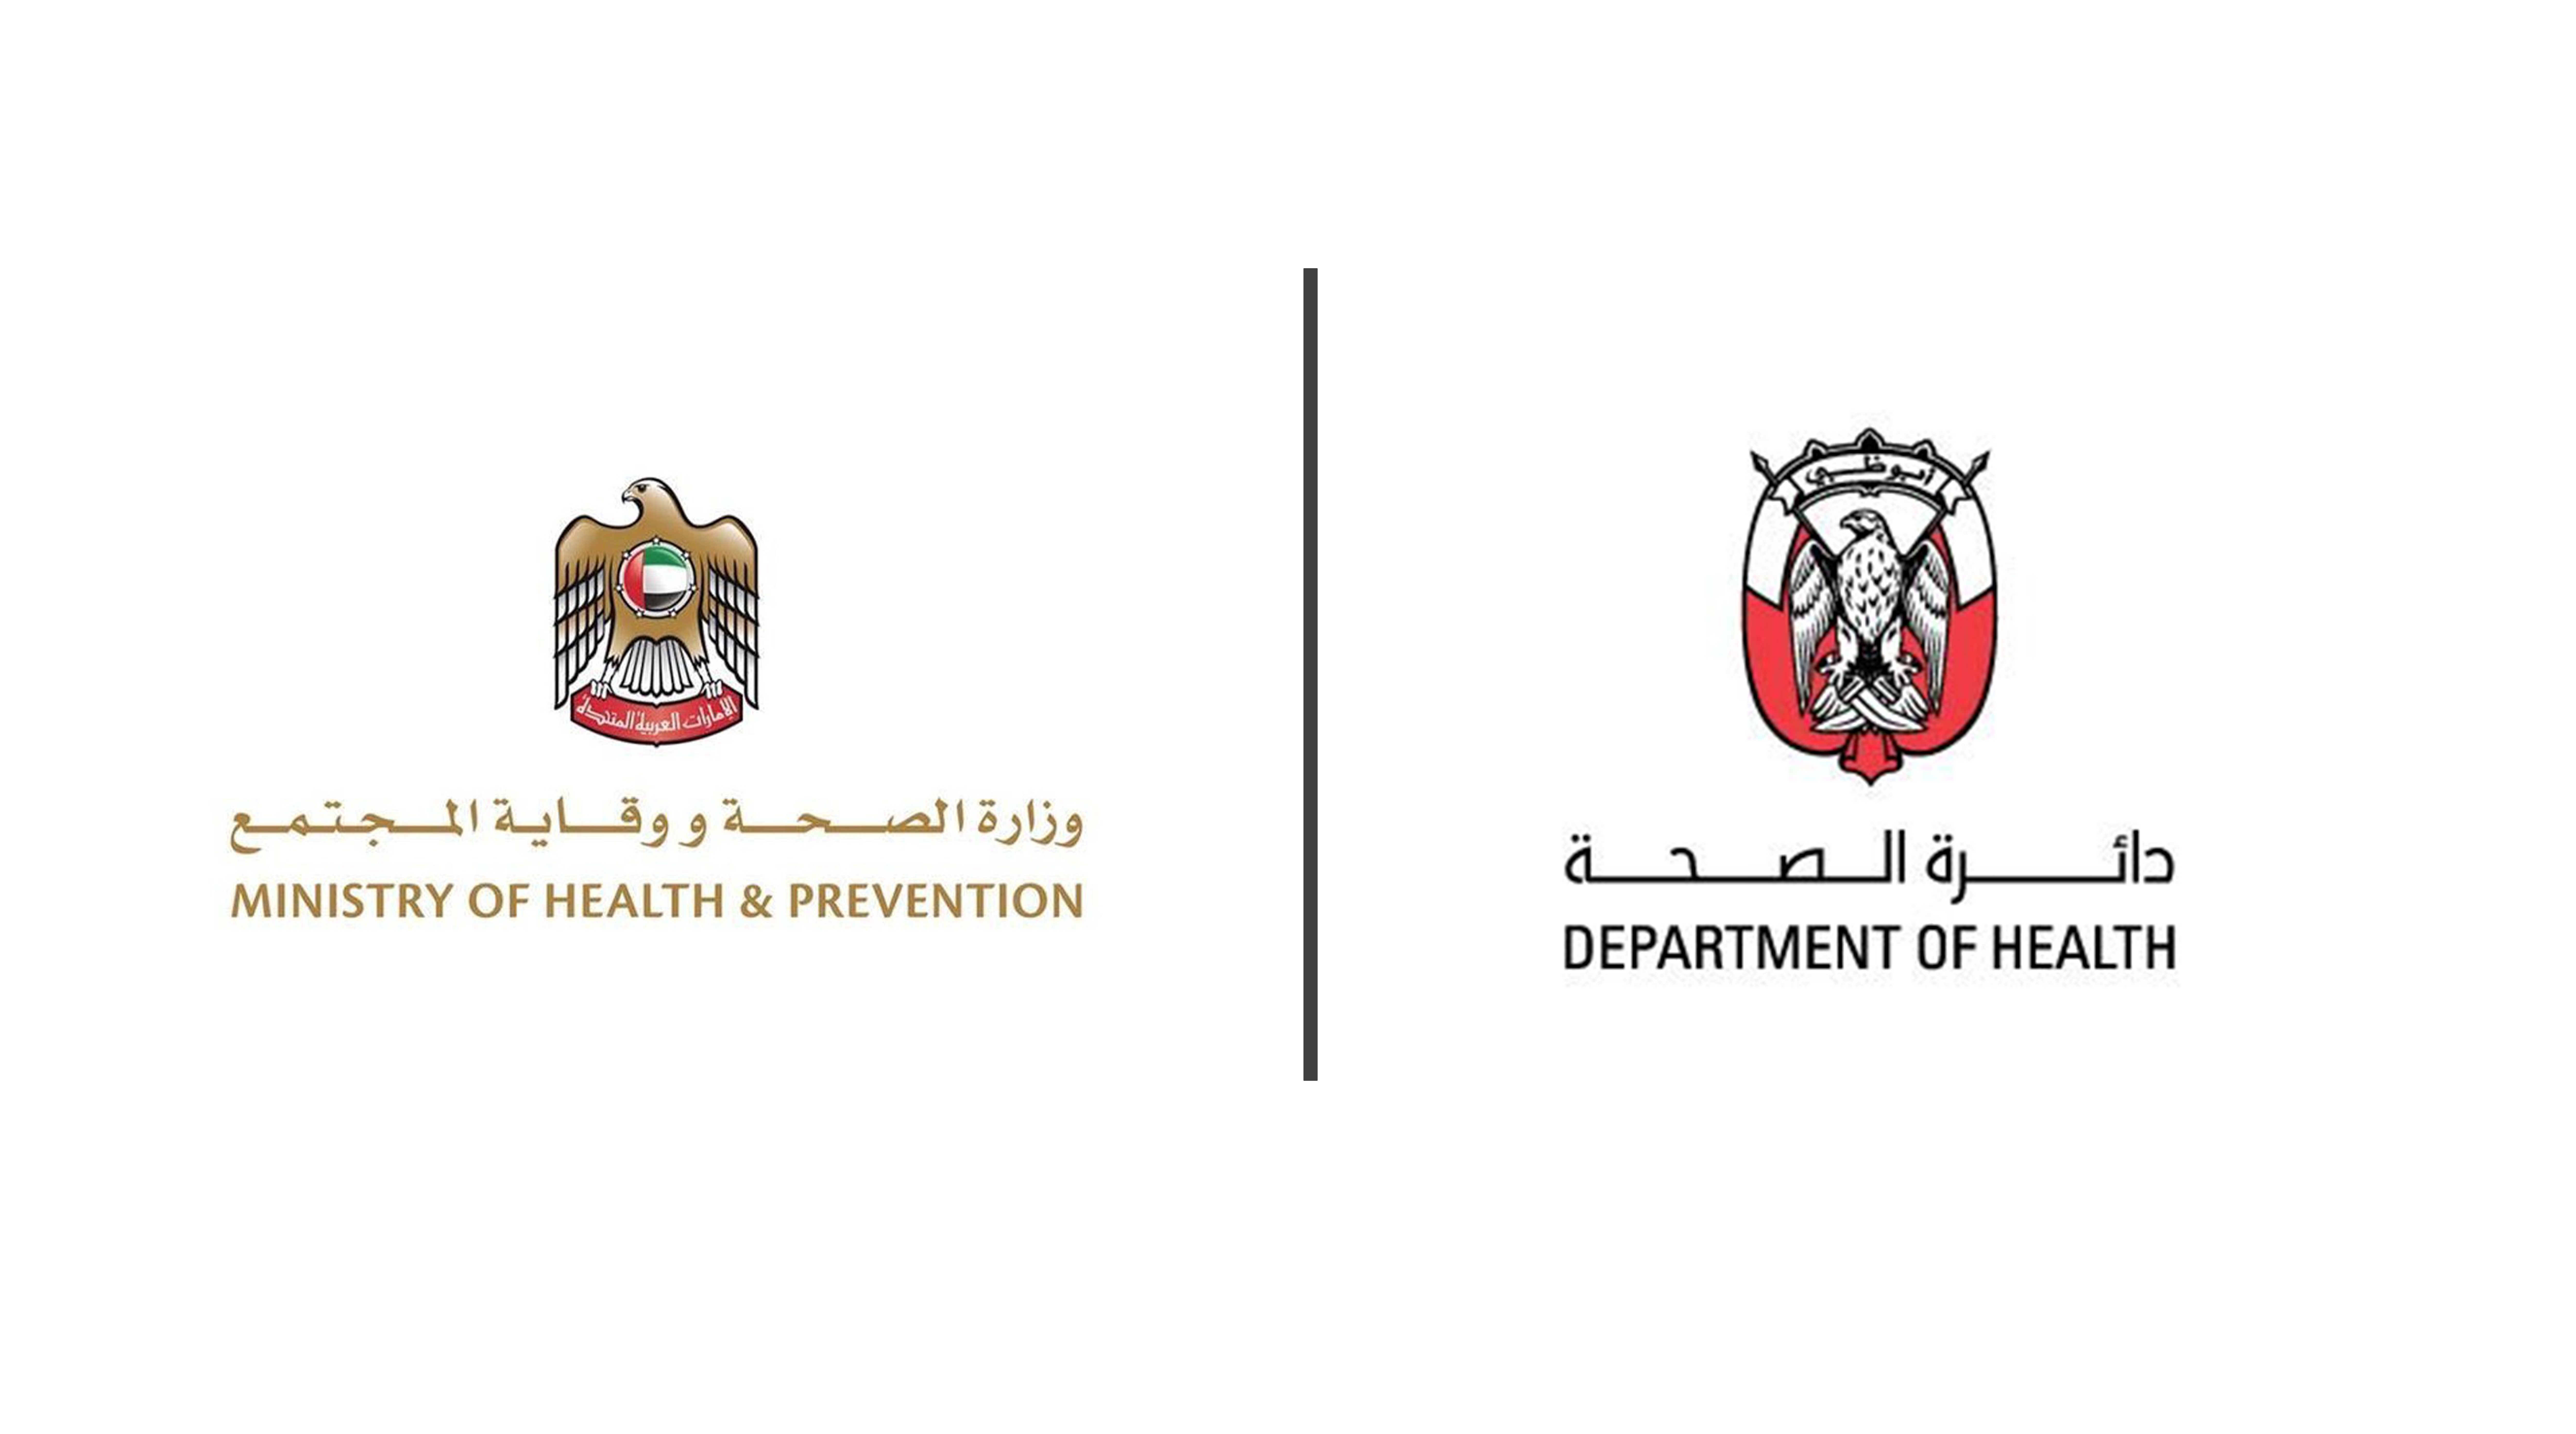 MoHAP has announced in coordination with Department of Health for Phase III of Covid-19 trial